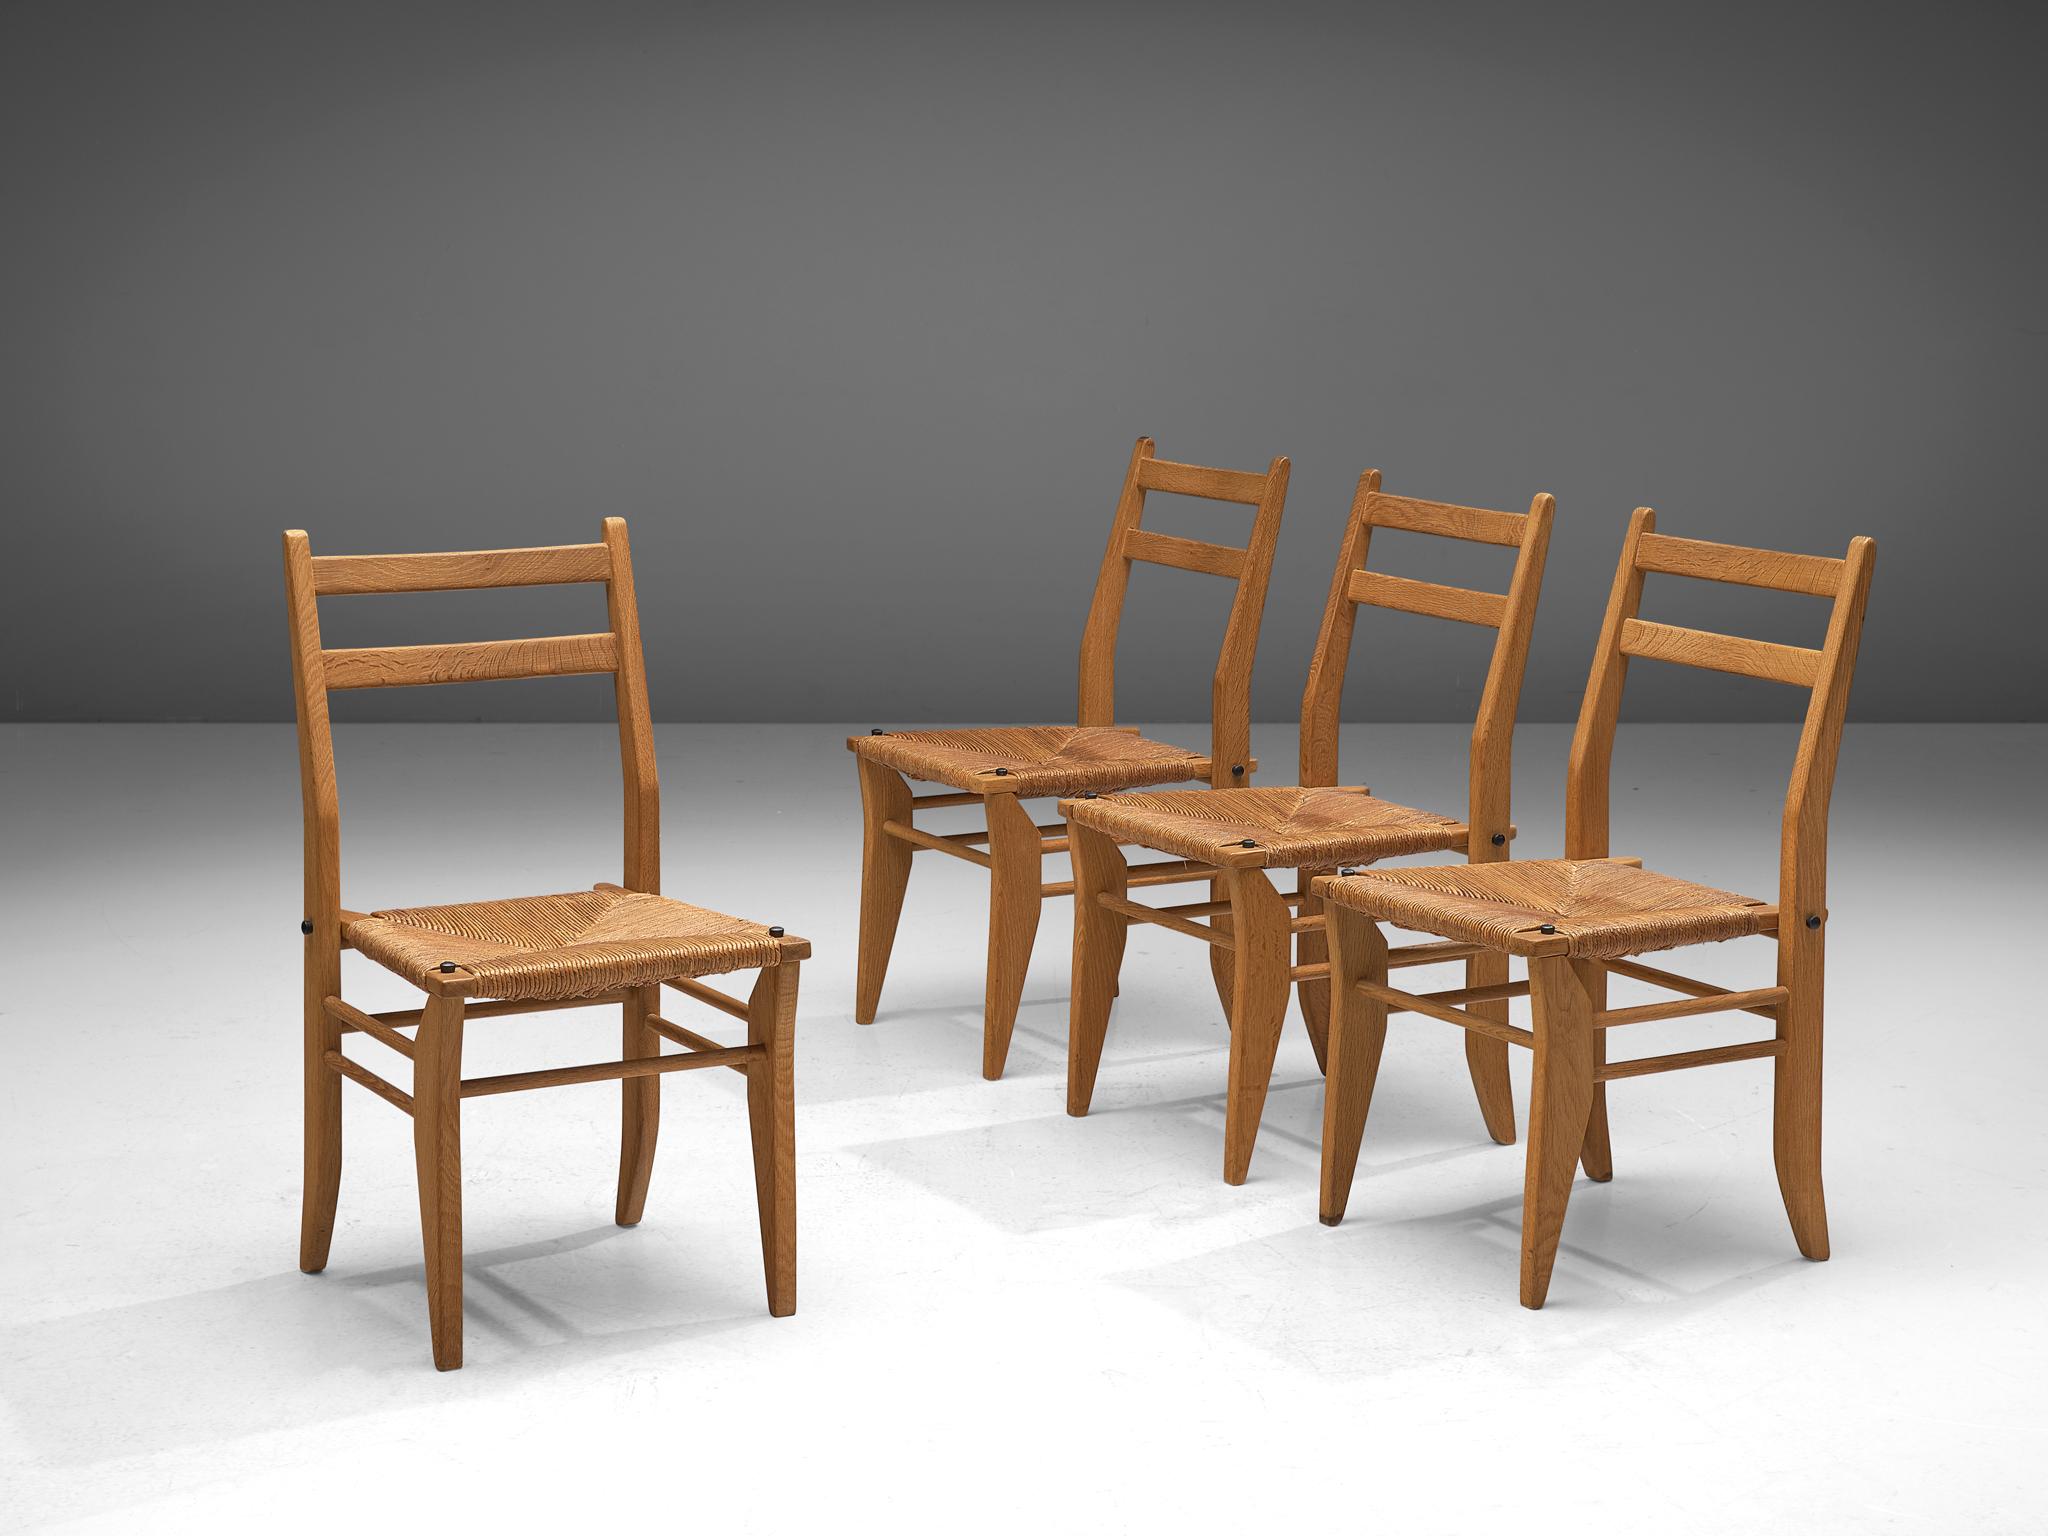 Guillerme & Chambron, set of four dining chairs, oak and rope, France, 1960s.

Set of four dining chairs in solid oak by Guillerme and Chambron. These chairs show a modest backrest that is combined with the characteristic sculpted legs of the French